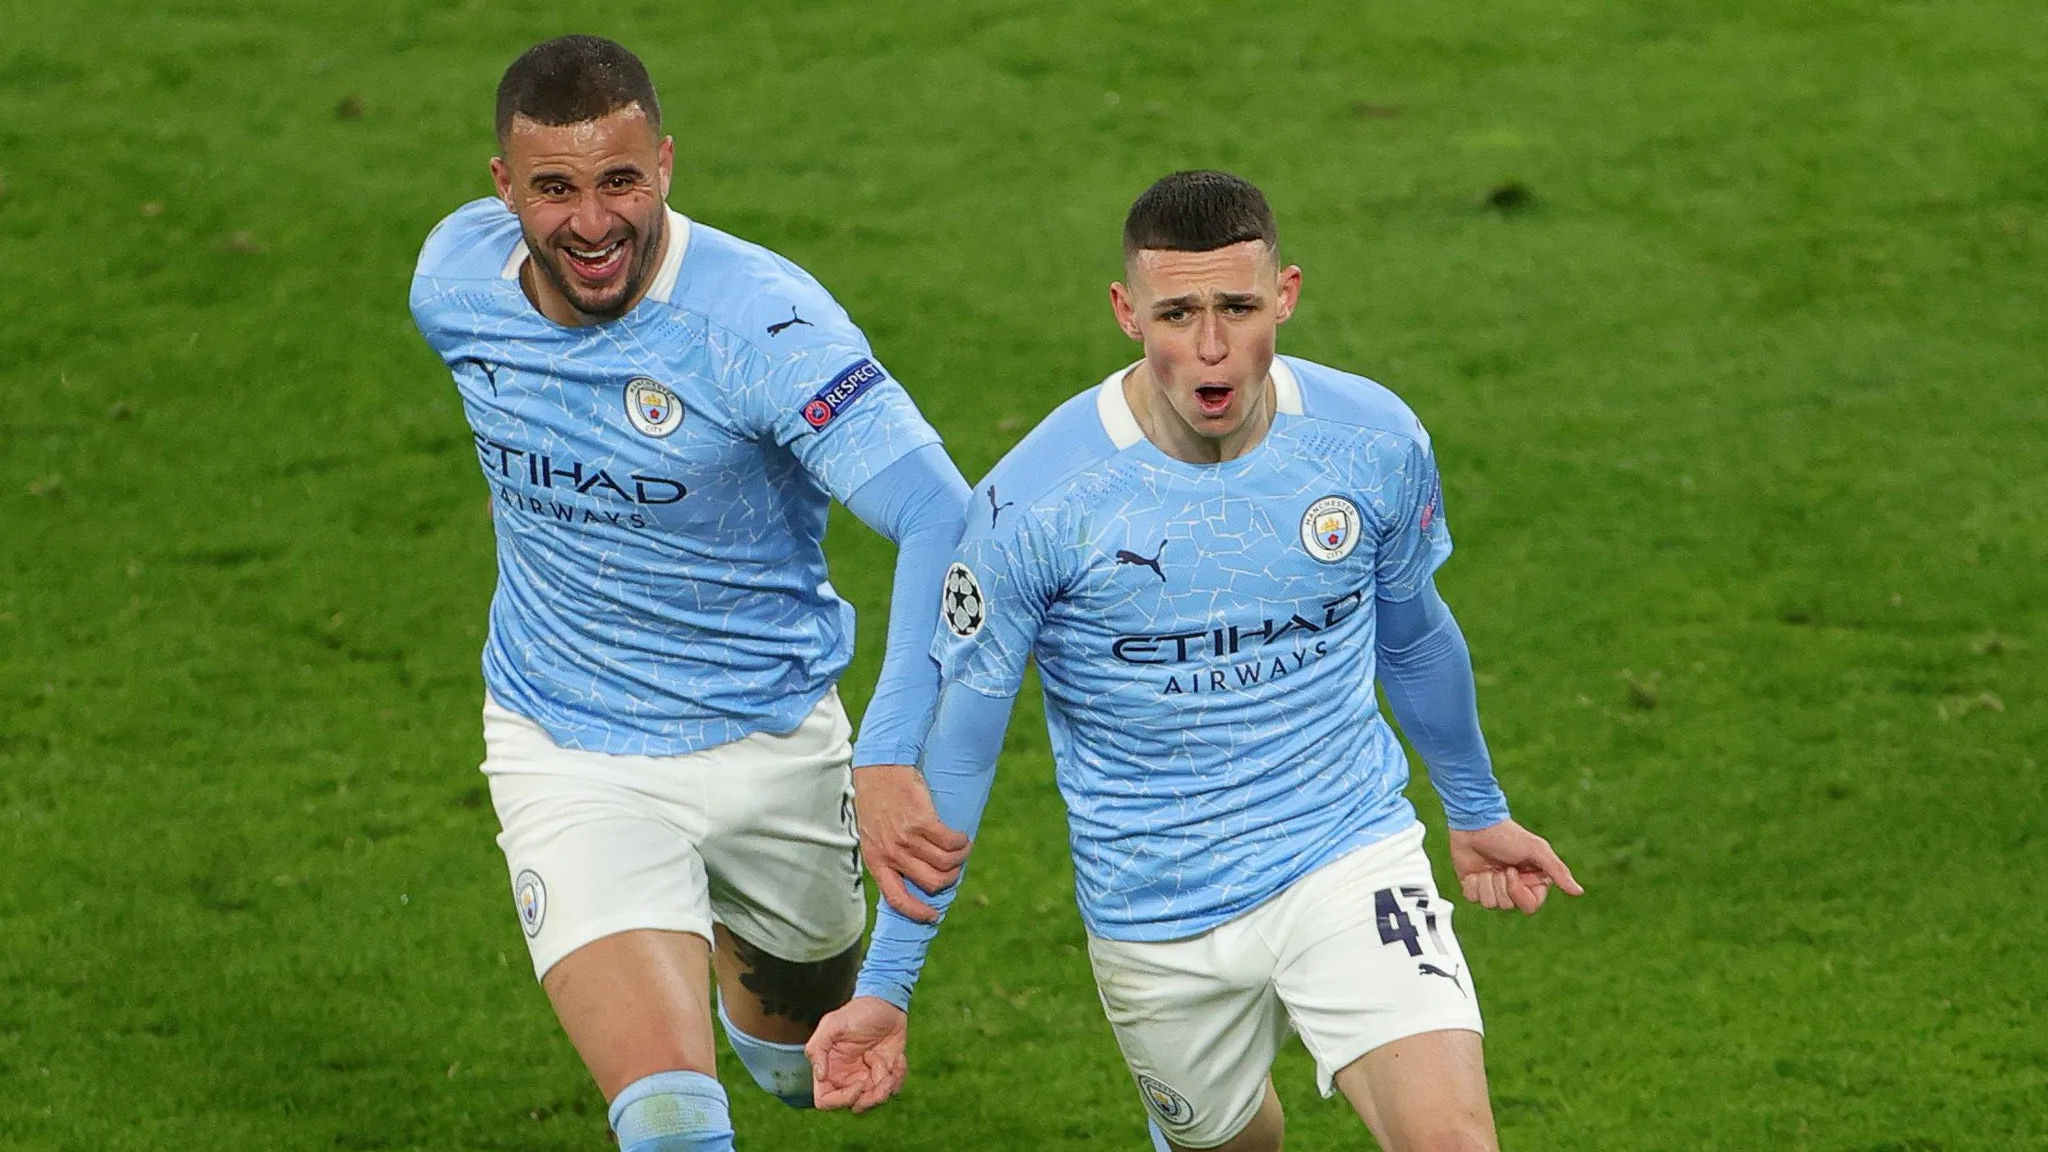 UCL: Phil Foden’s winner secures semi-final berth for Manchester City